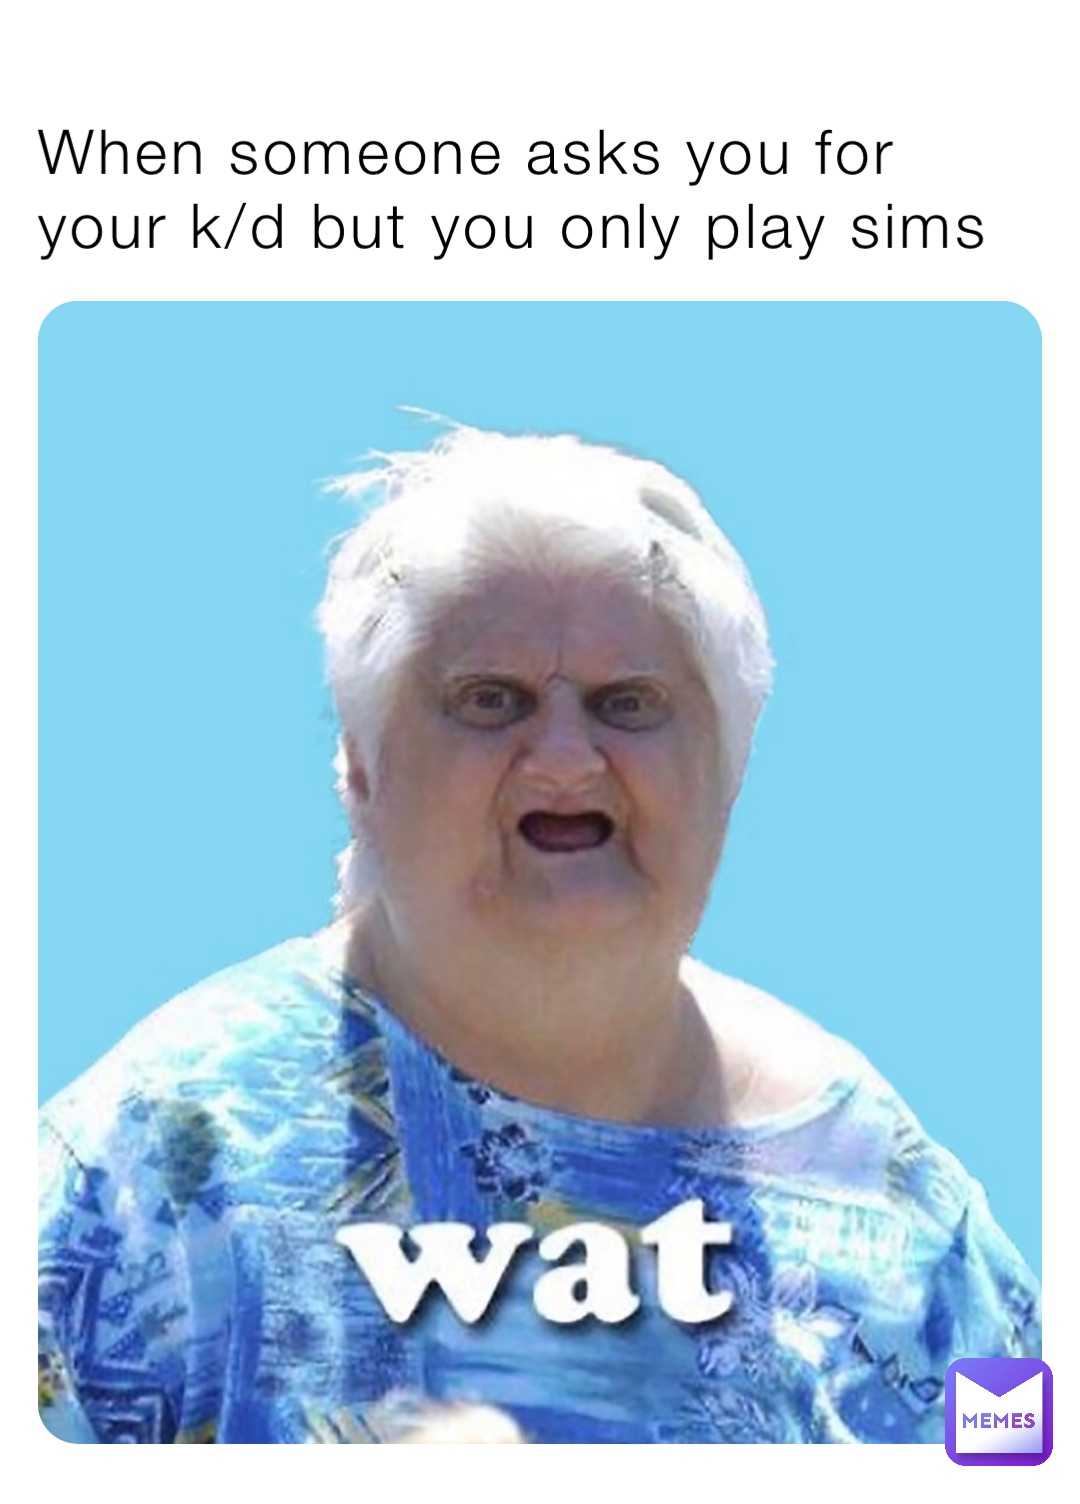 When someone asks you for your k/d but you only play sims